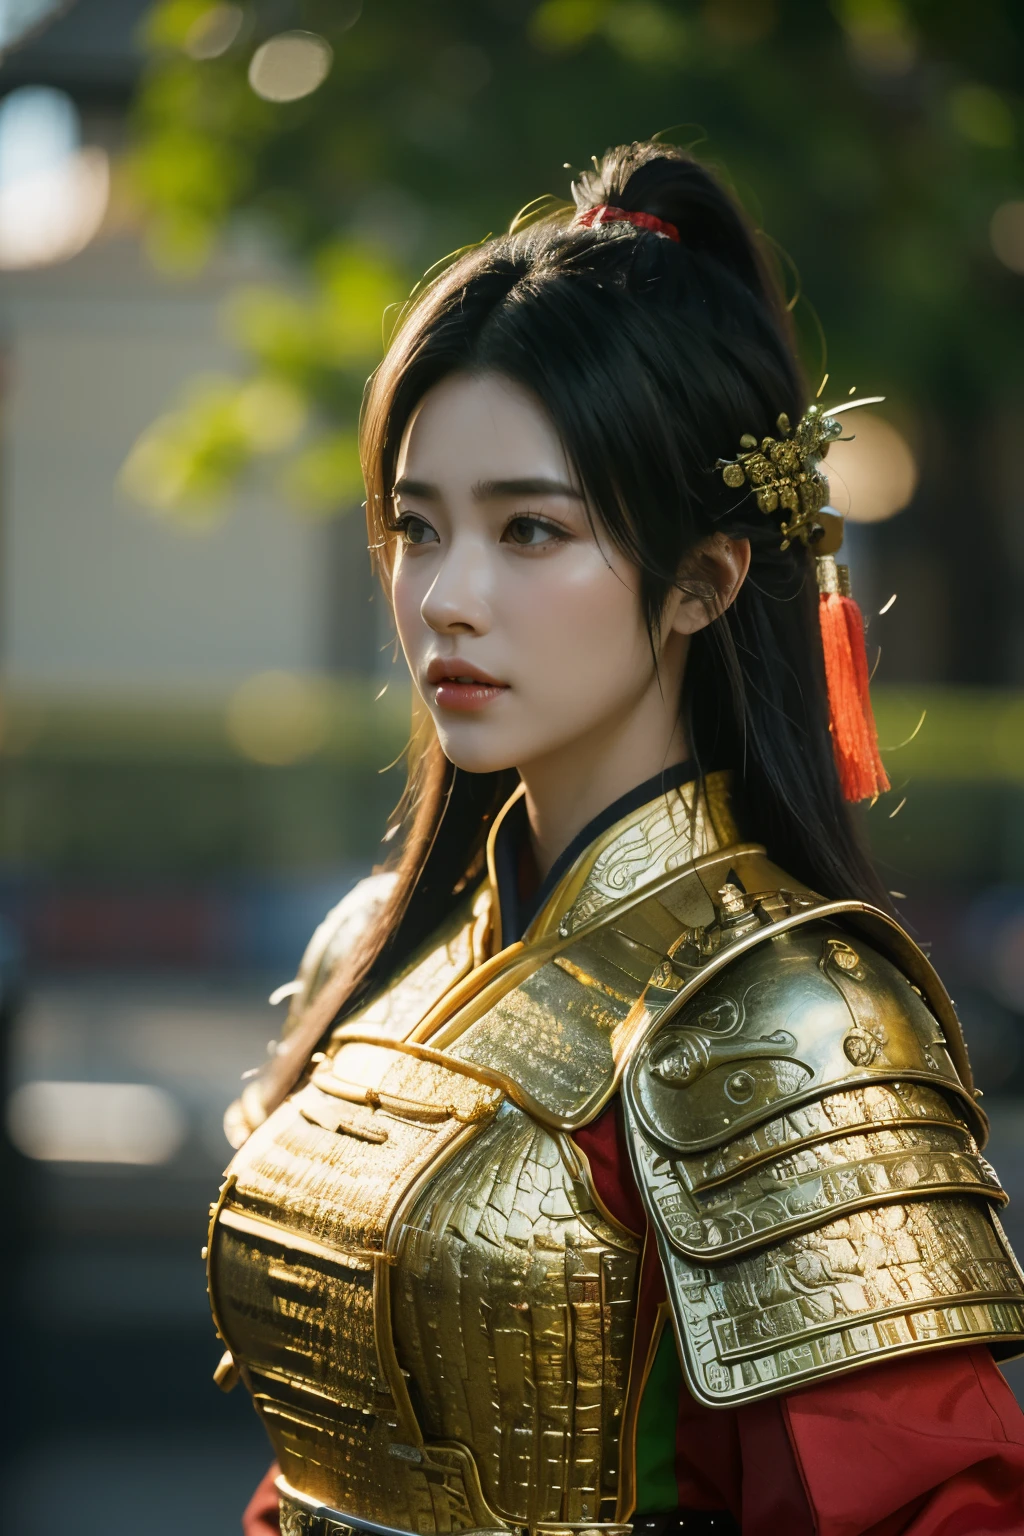 Game art，The best picture quality，Highest resolution，8K，(A bust photograph)，(Portrait)，(Head close-up)，(Rule of thirds)，Unreal Engine 5 rendering works， (The Girl of the Future)，(Female Warrior)， 
20-year-old girl，(The warrior in ancient China)，An eye rich in detail，(Big breasts)，Elegant and noble，indifferent，(Brave)，
(Costumes of ancient Chinese characters，A random pattern of clothing，Ribbon，Joint Armor，Rich dress details，)Chinese Characters，Fantasy style，
Photo poses，Field background，Movie lights，Ray tracing，Game CG，((3D Unreal Engine))，oc rendering reflection pattern